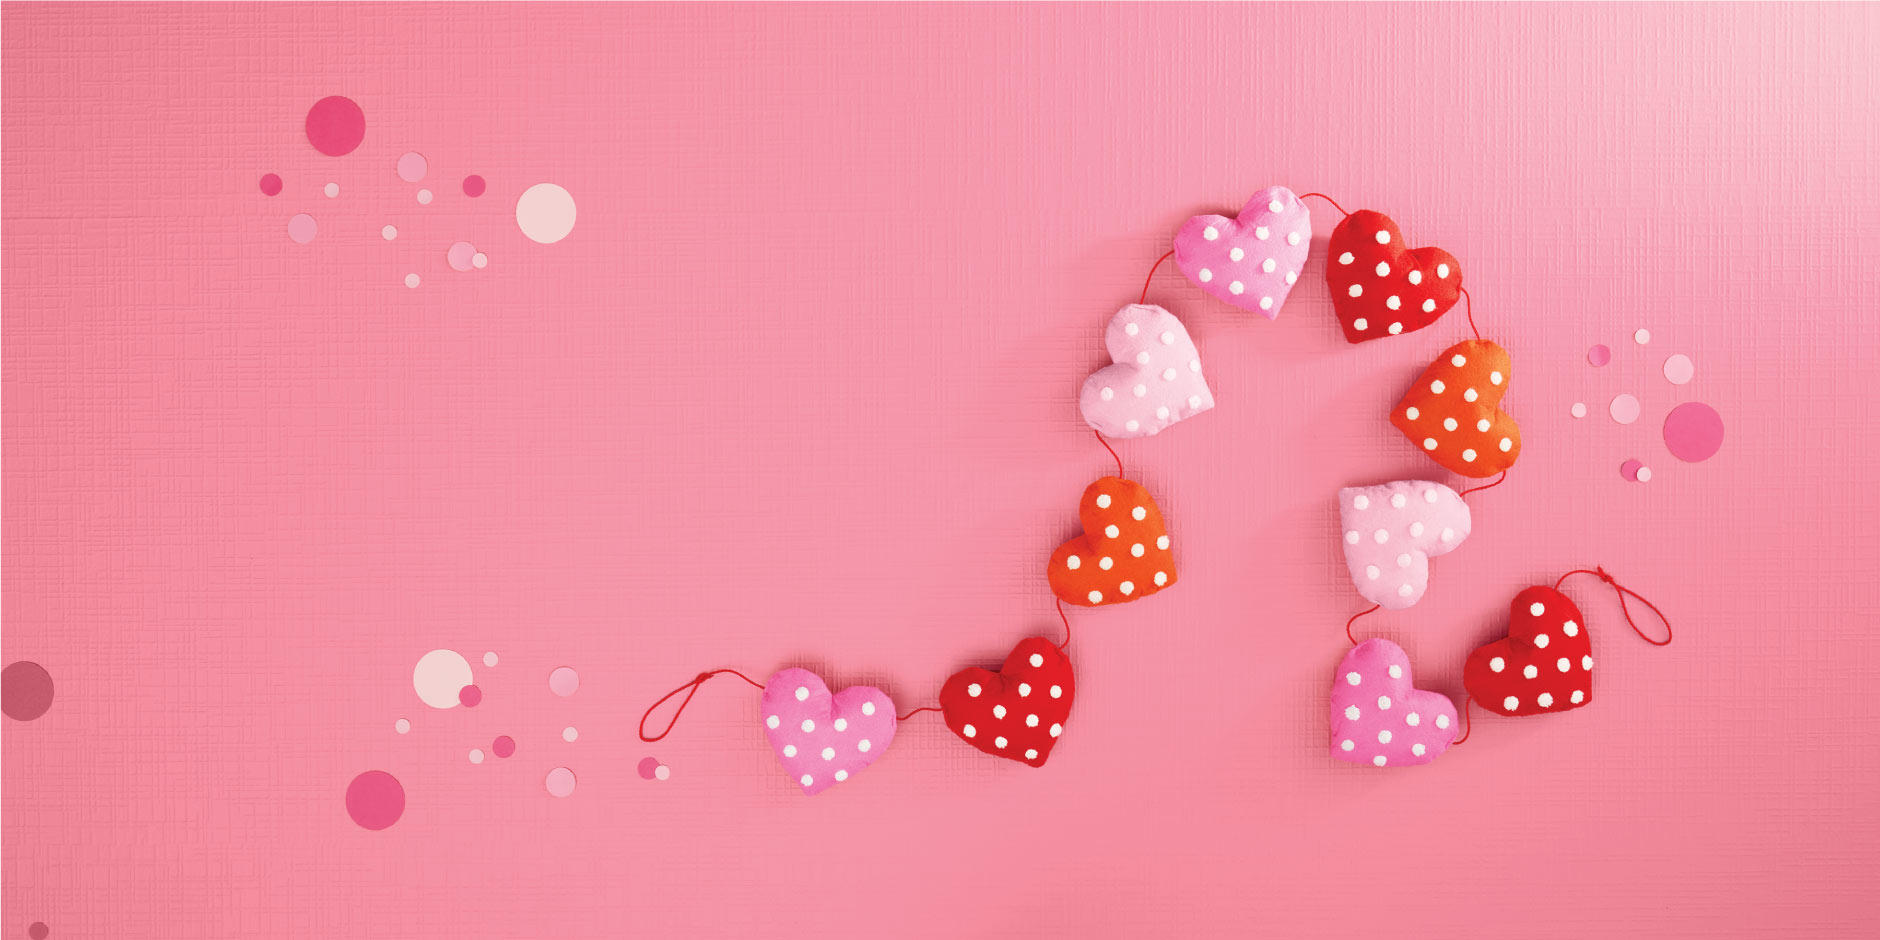 a pink background with red and white candies